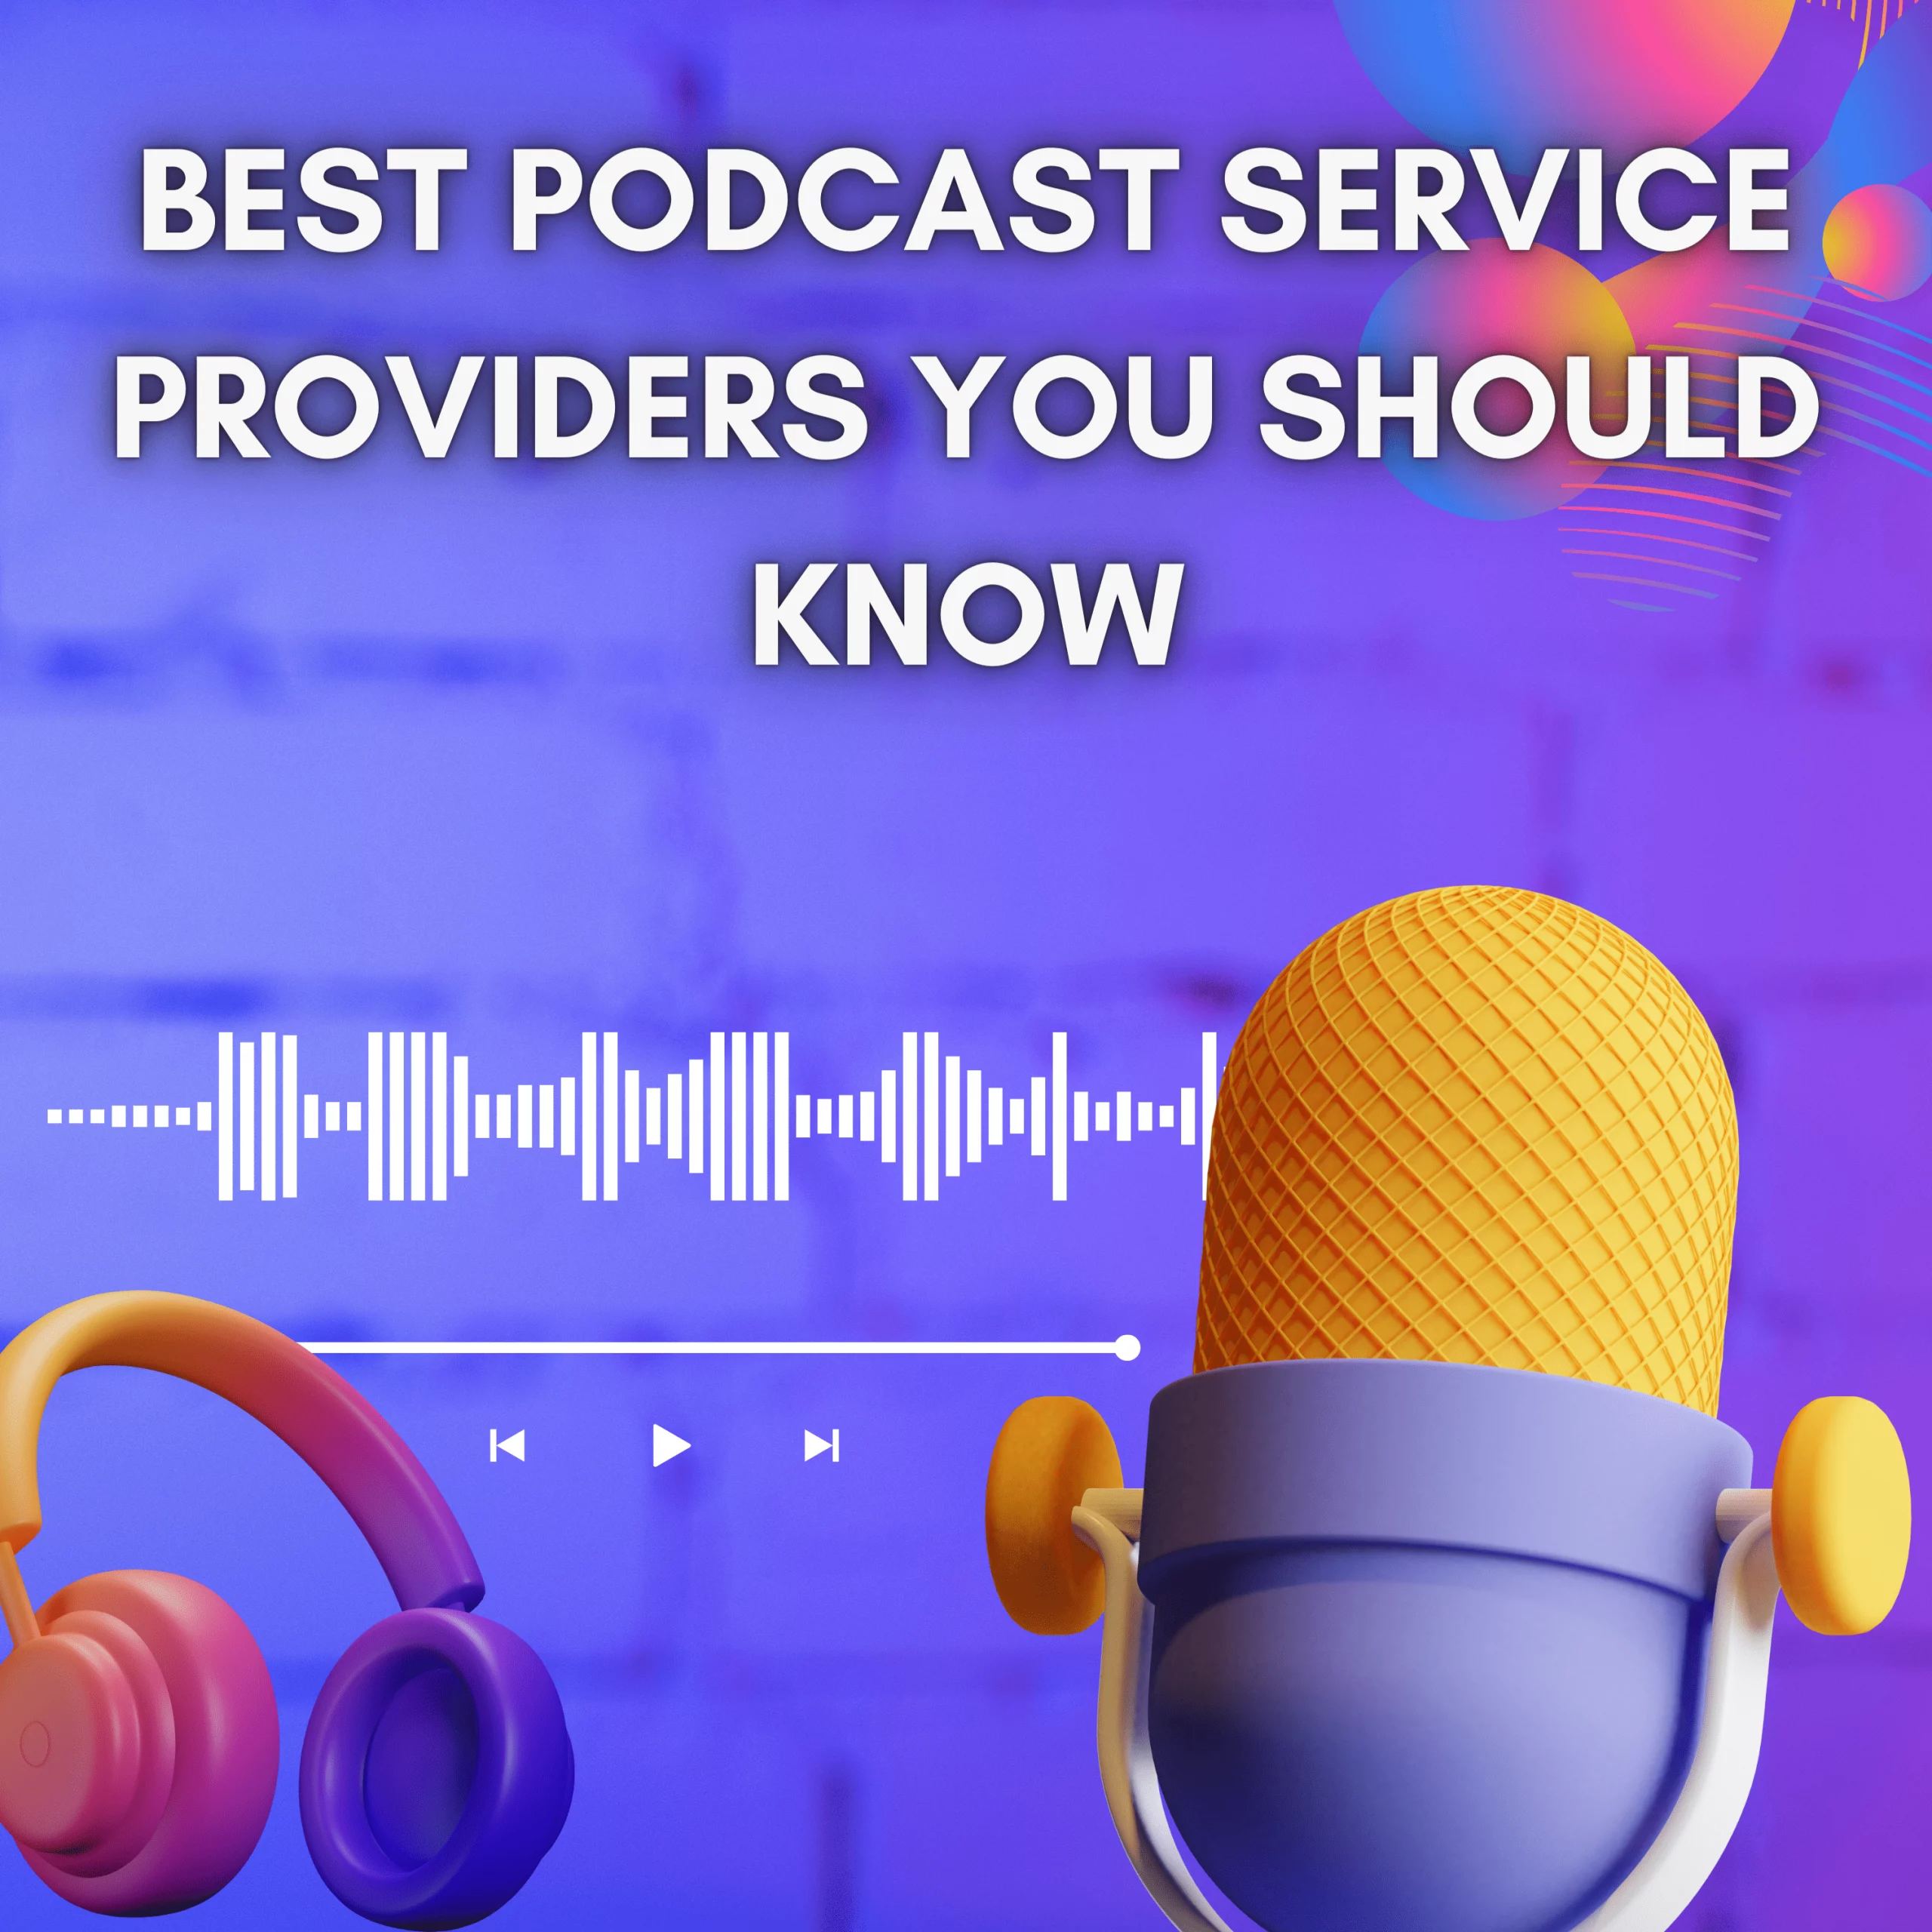 Best-Podcast-Service-Providers-You-Should-Know-_1_